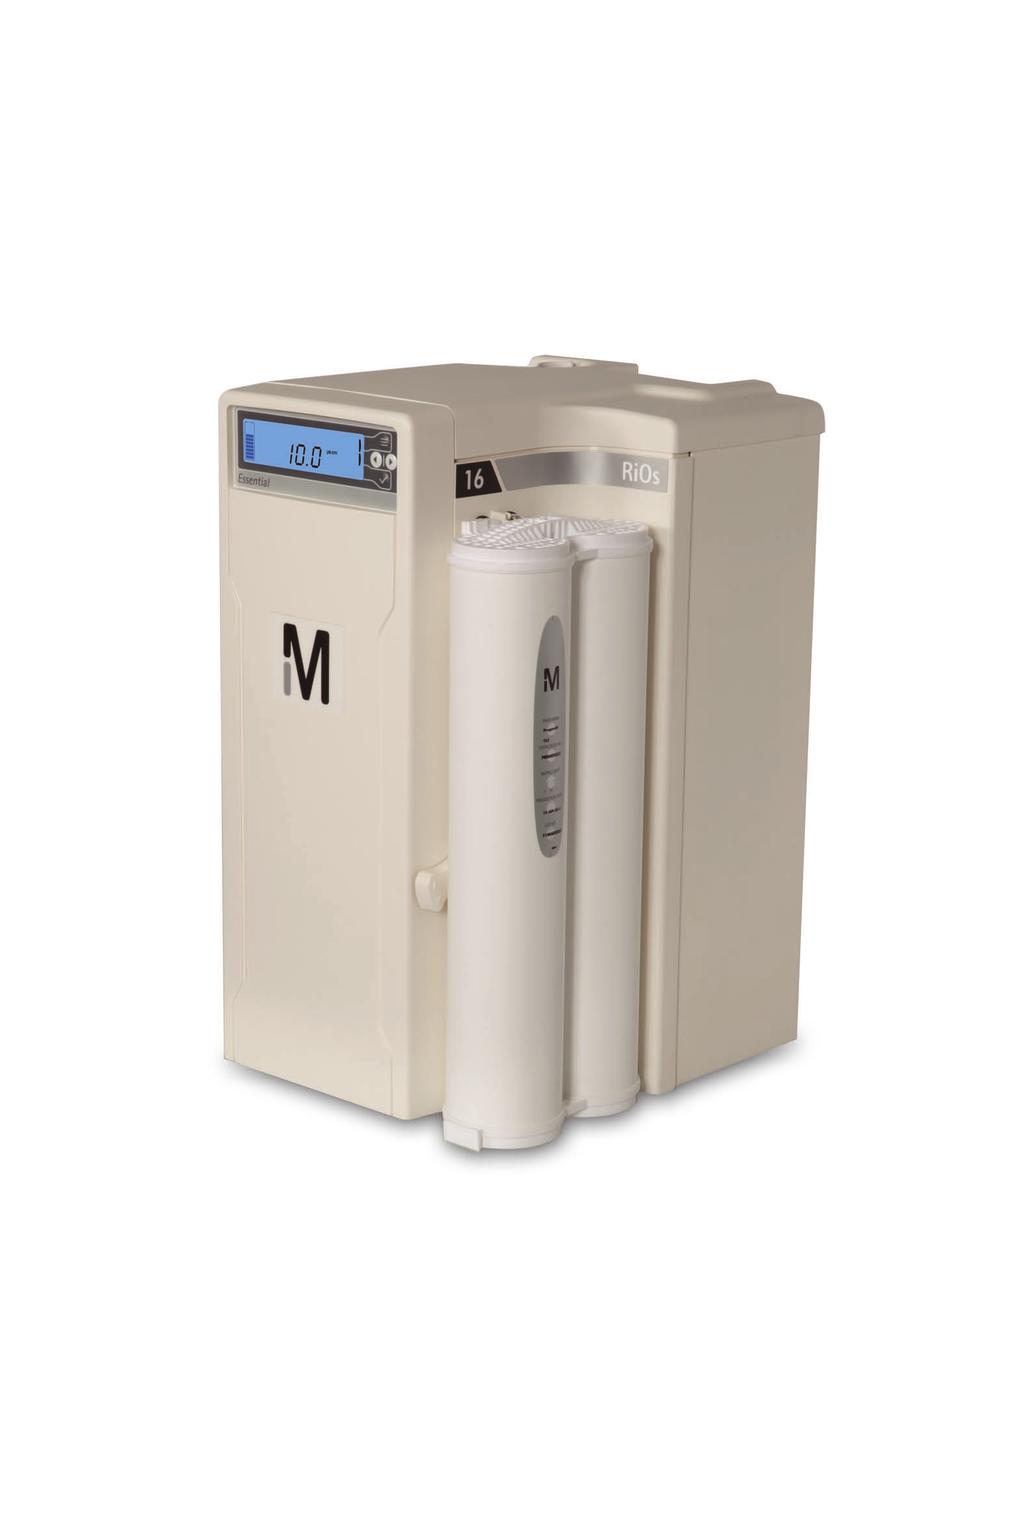 RiOs Essential 5, 8, 16, 24 Water Purification Systems A reliable, user-friendly